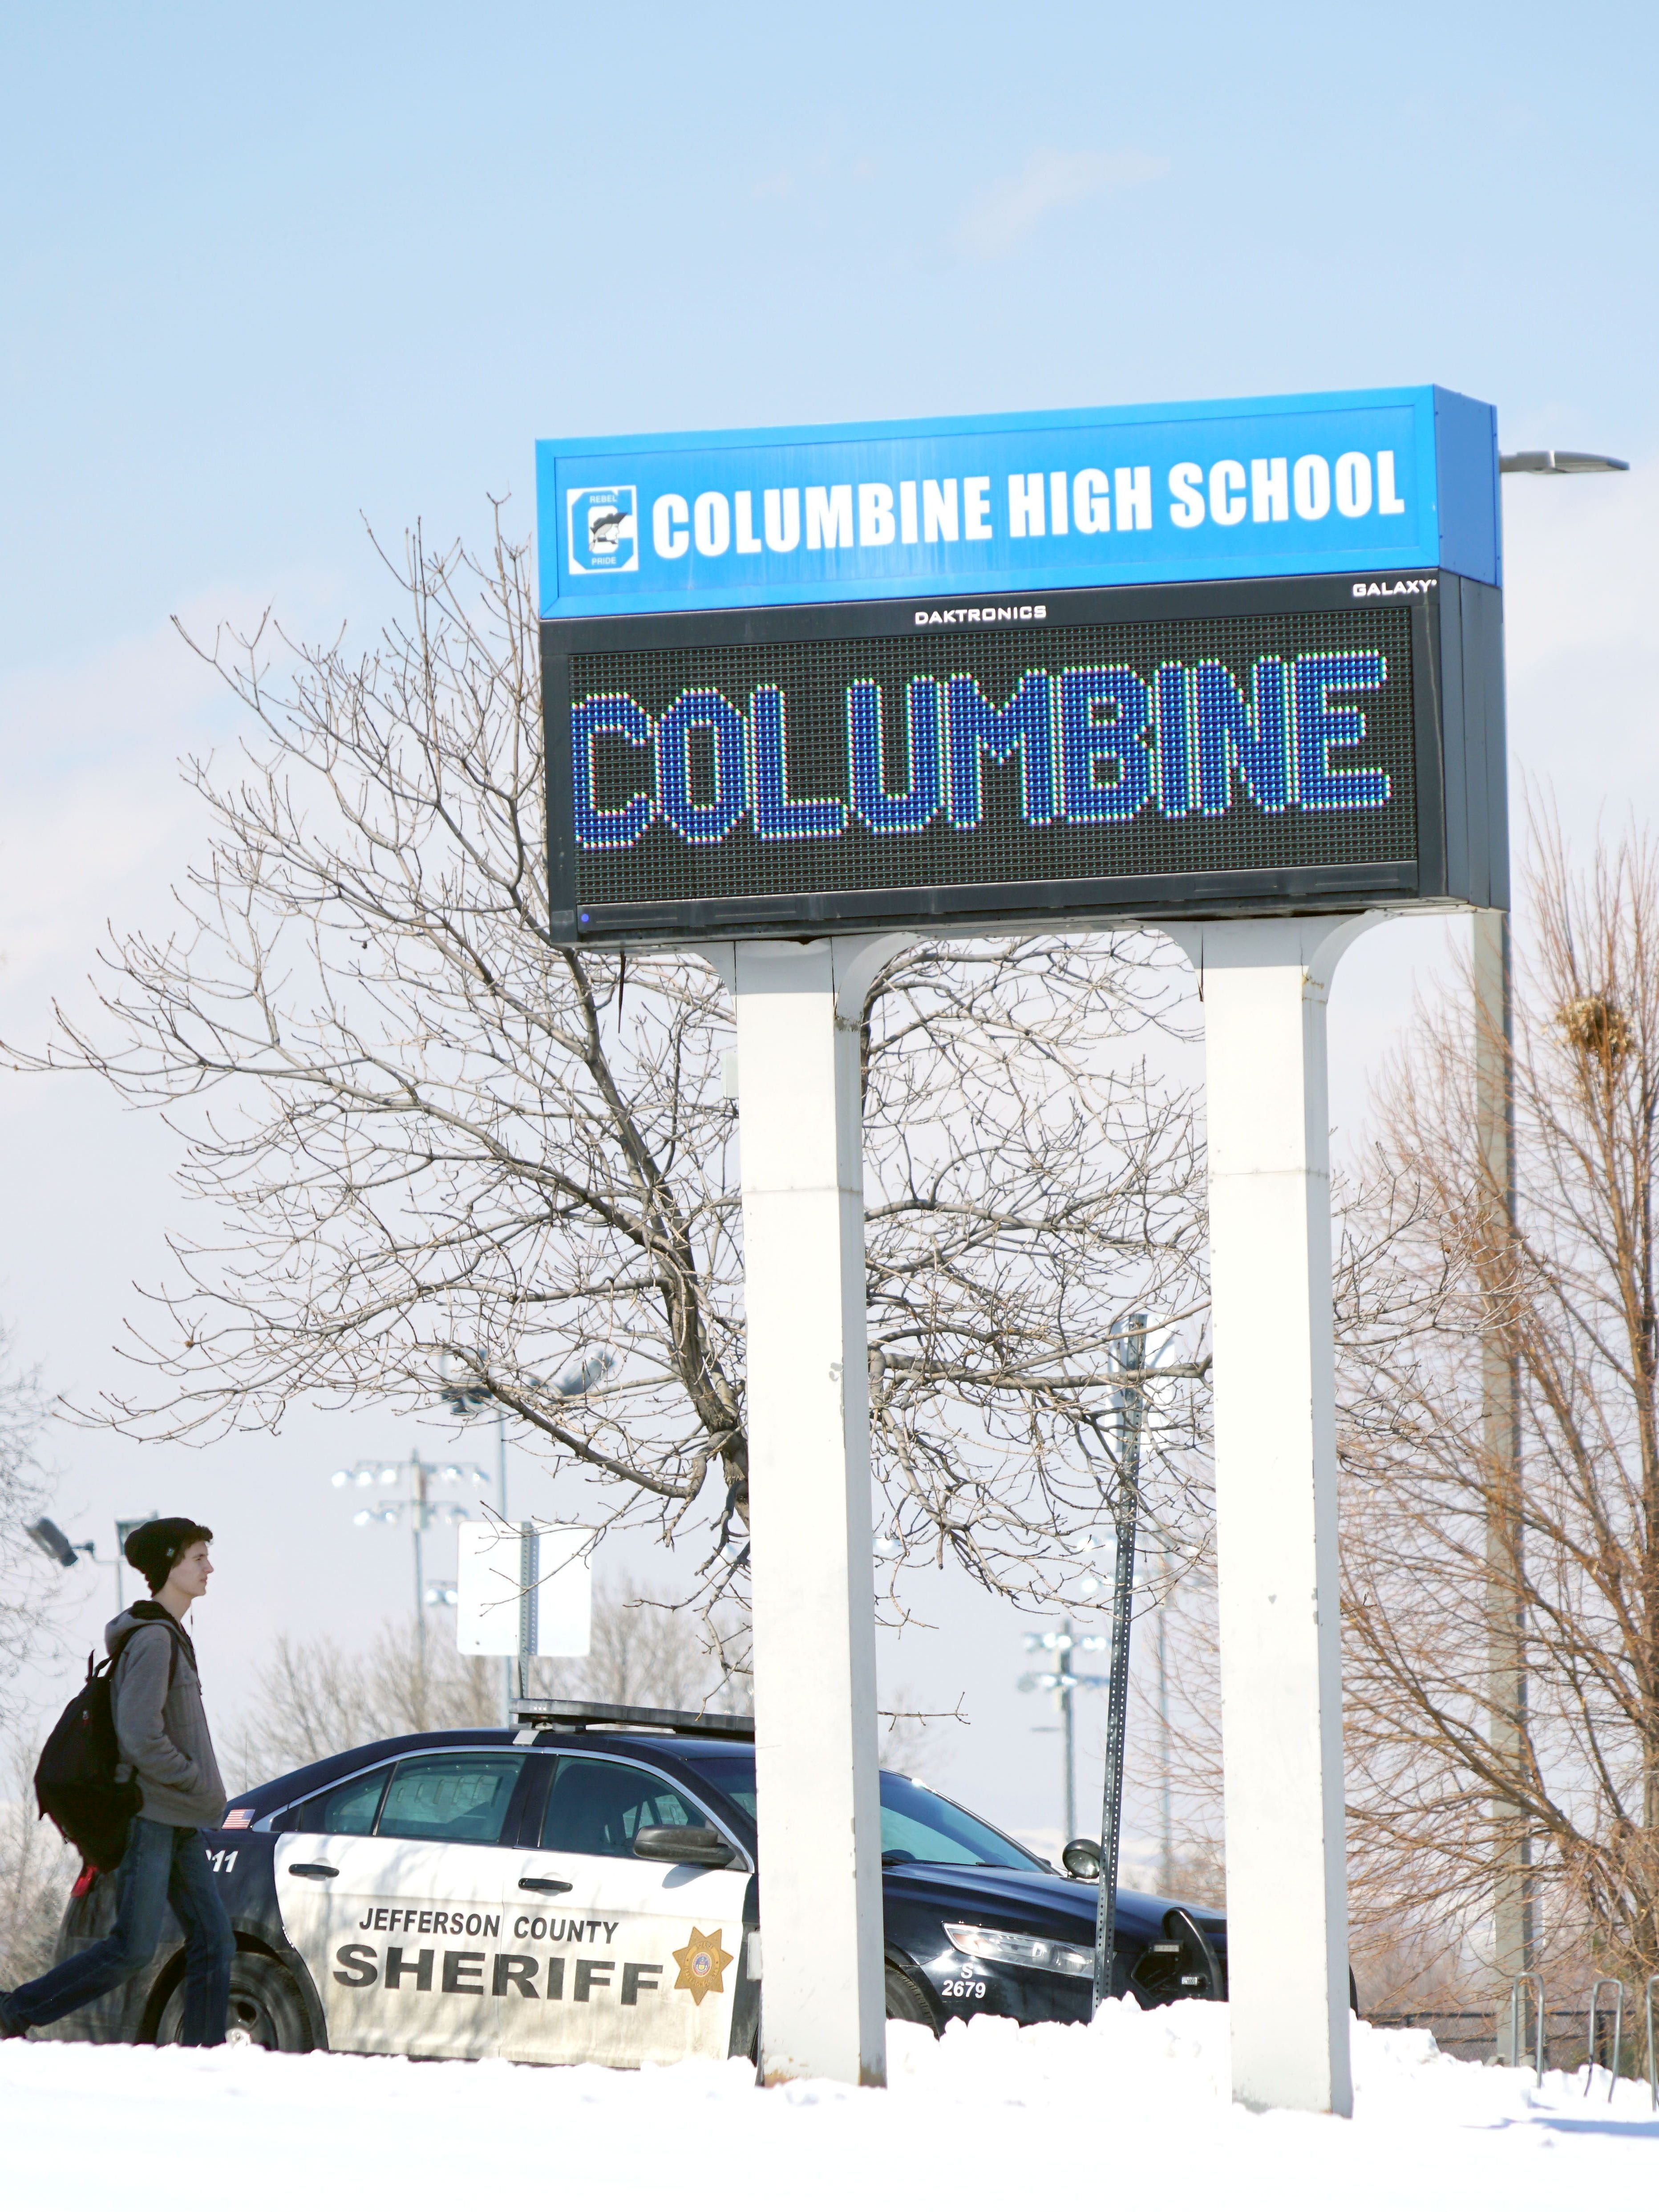 Two Kentucky students suspended after dressing as Columbine shooters